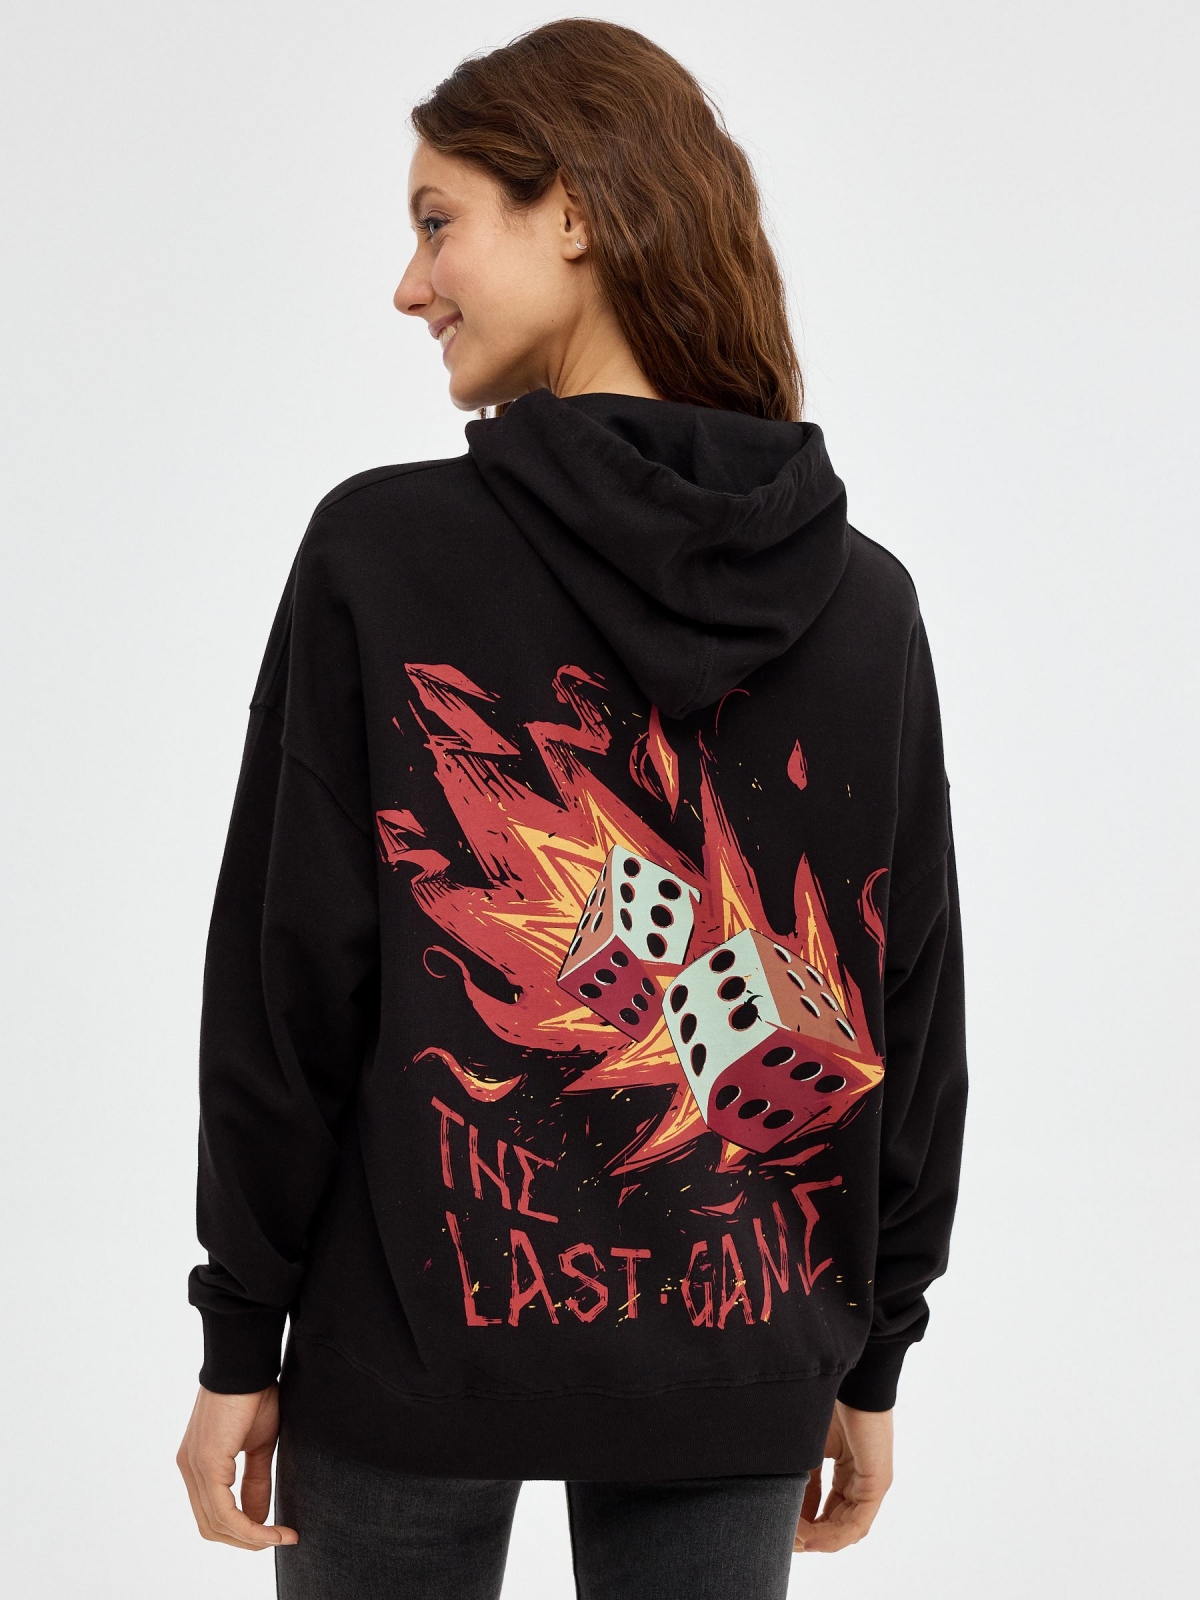 The Last Game Sweatshirt black middle back view